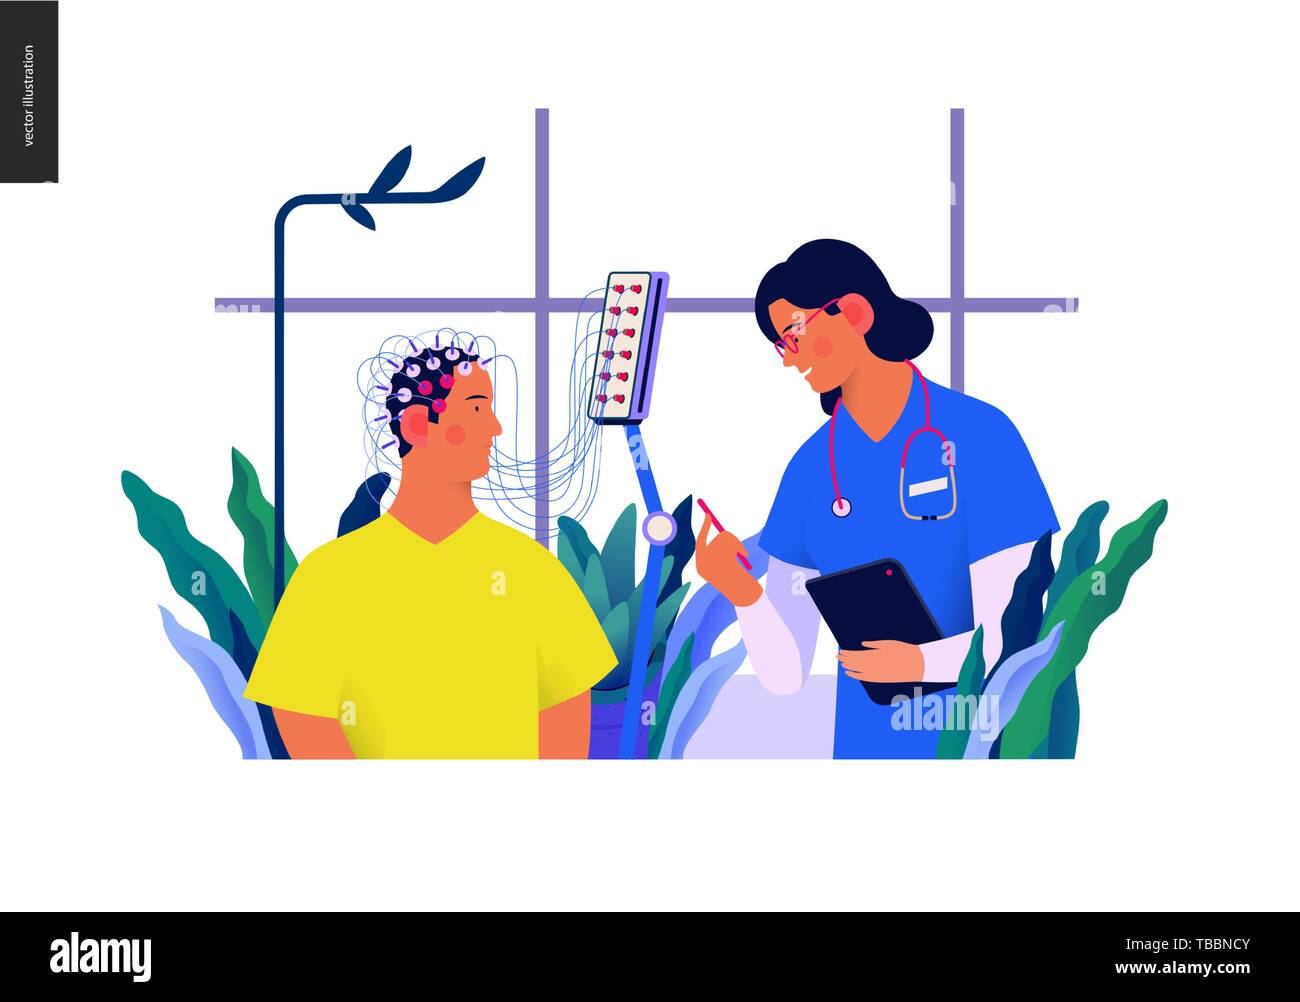 Medical tests template - EEG - electroencephalography - modern flat vector concept digital illustration of encephalography procedure - a patient with  Stock Vector